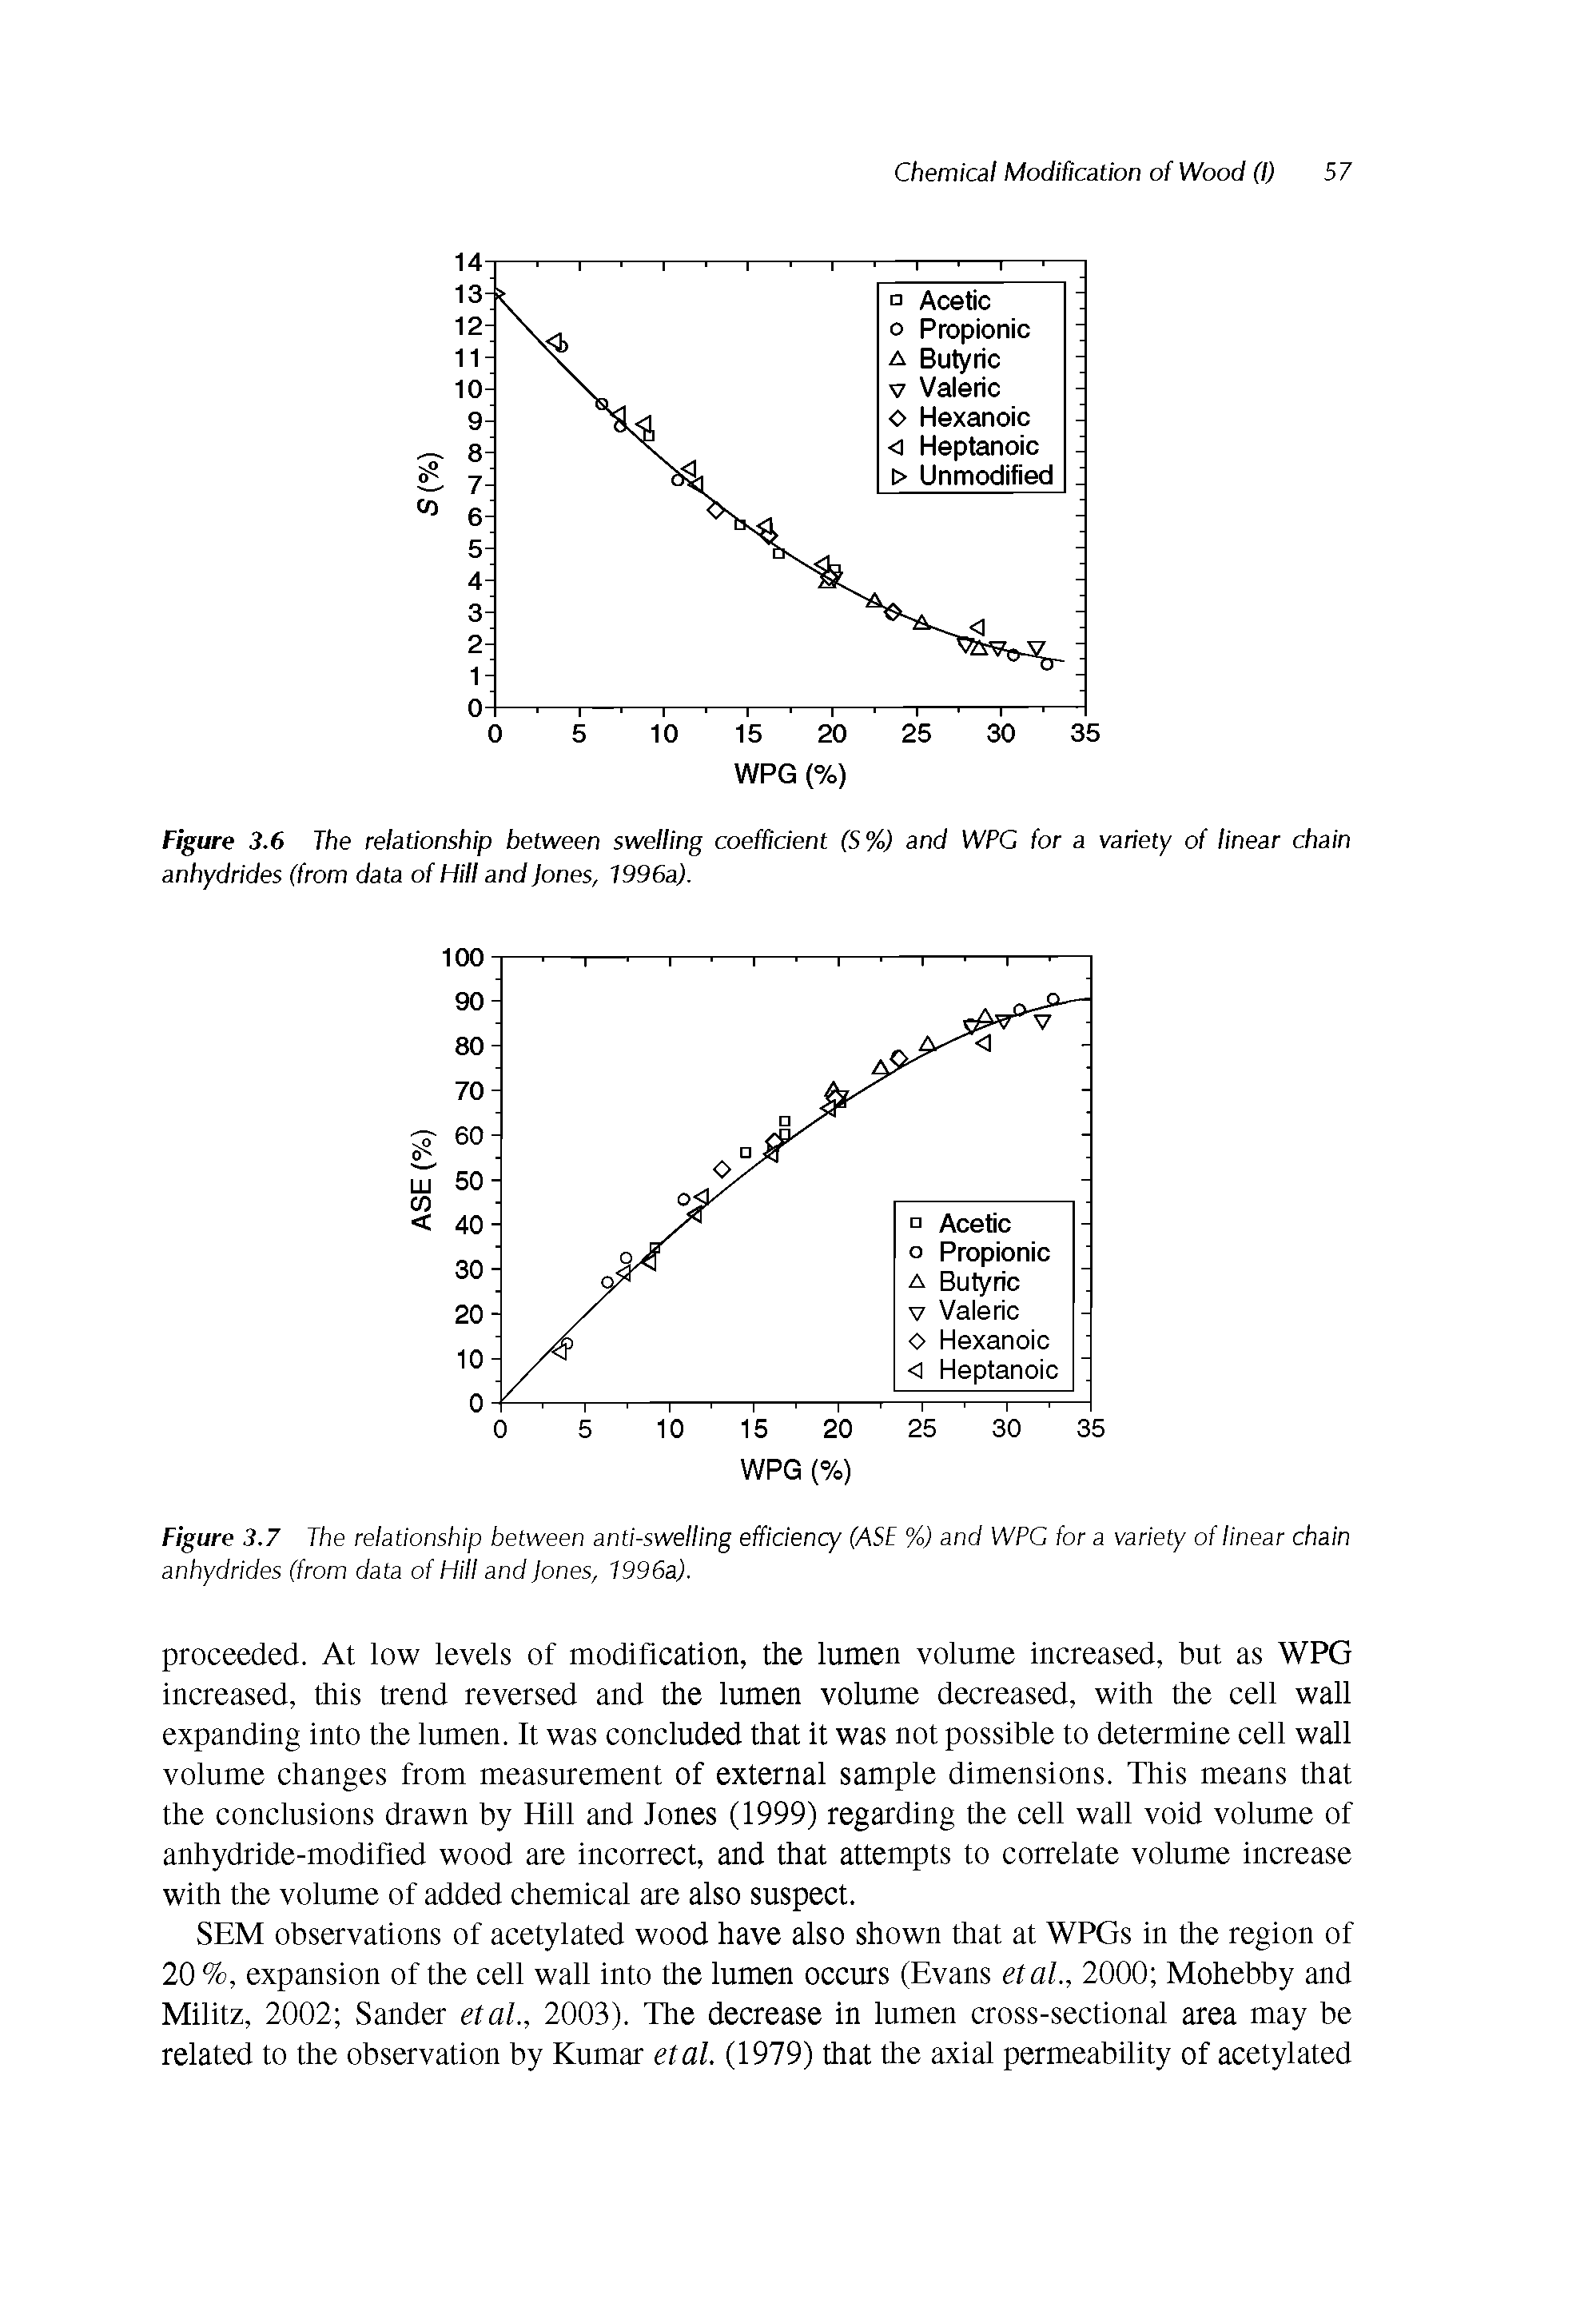 Figure 3.6 The relationship between swelling coefficient (S%) and WPG for a variety of linear chain anhydrides (from data of Hill and Jones, 1996a).